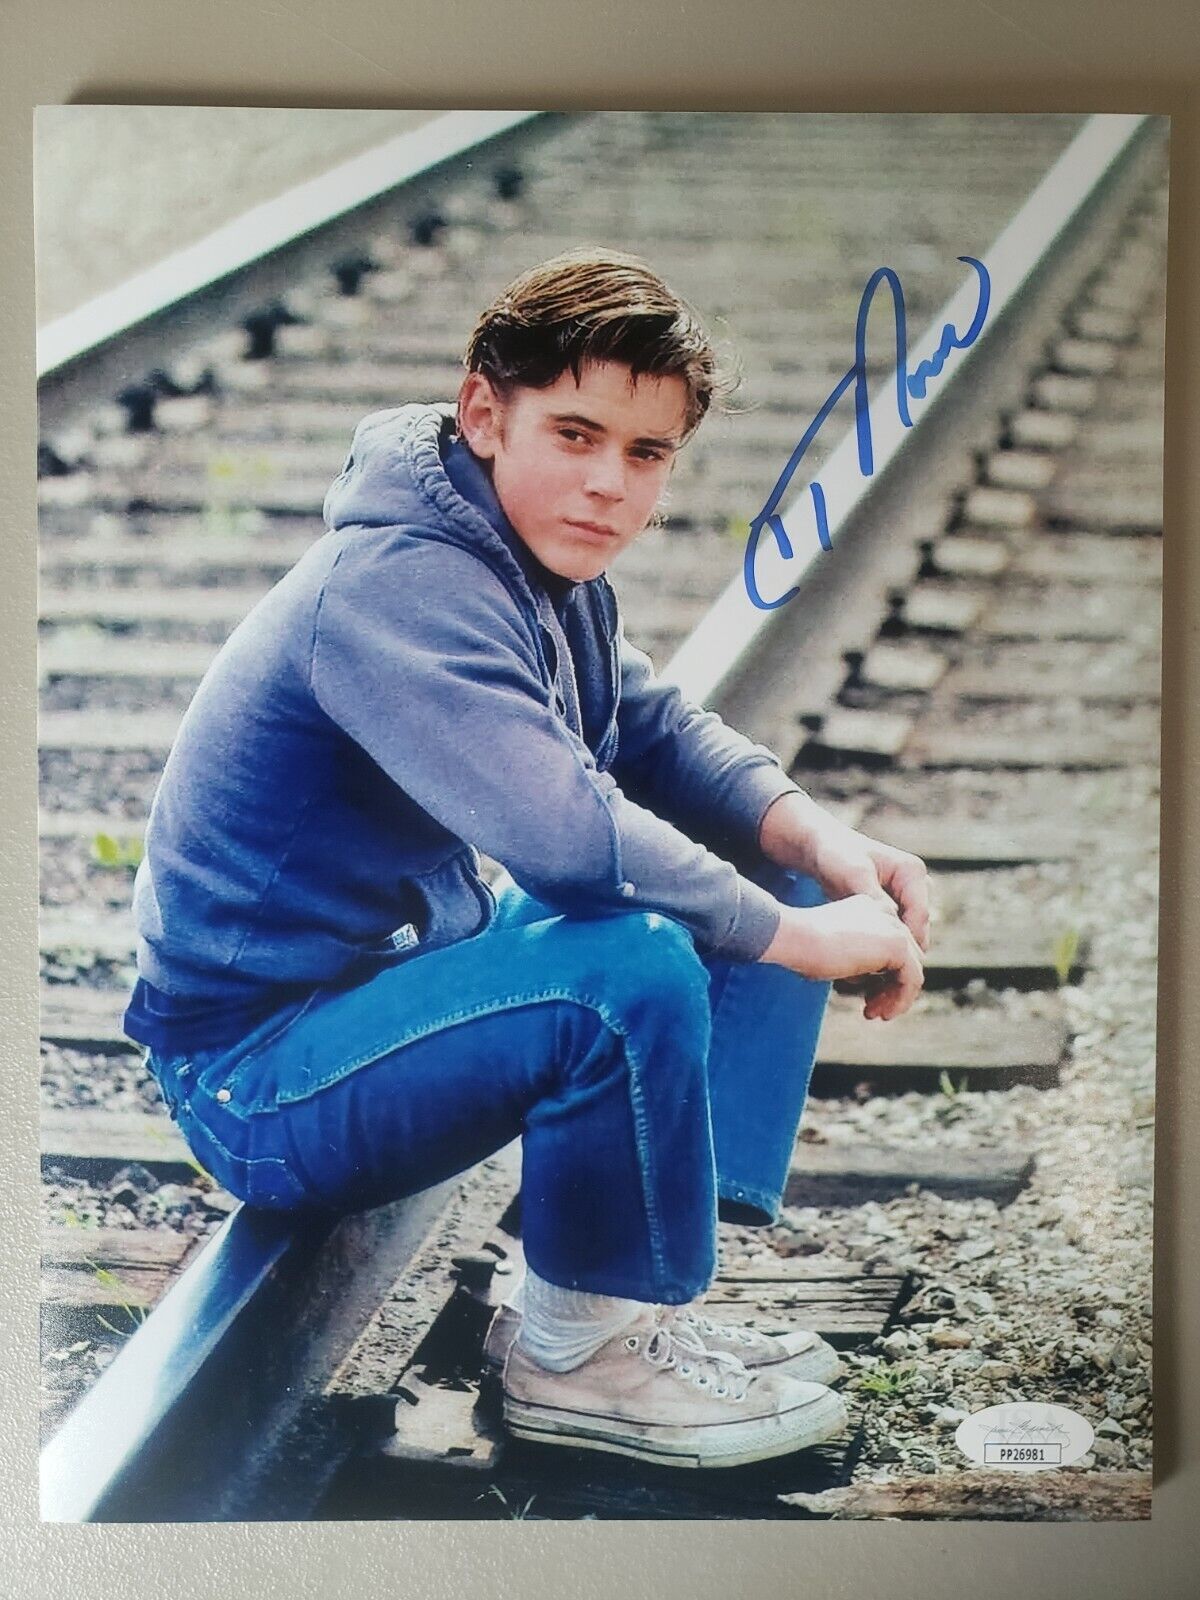 8X10 Autographed by C Thomas Howell in The Outsiders. JSA